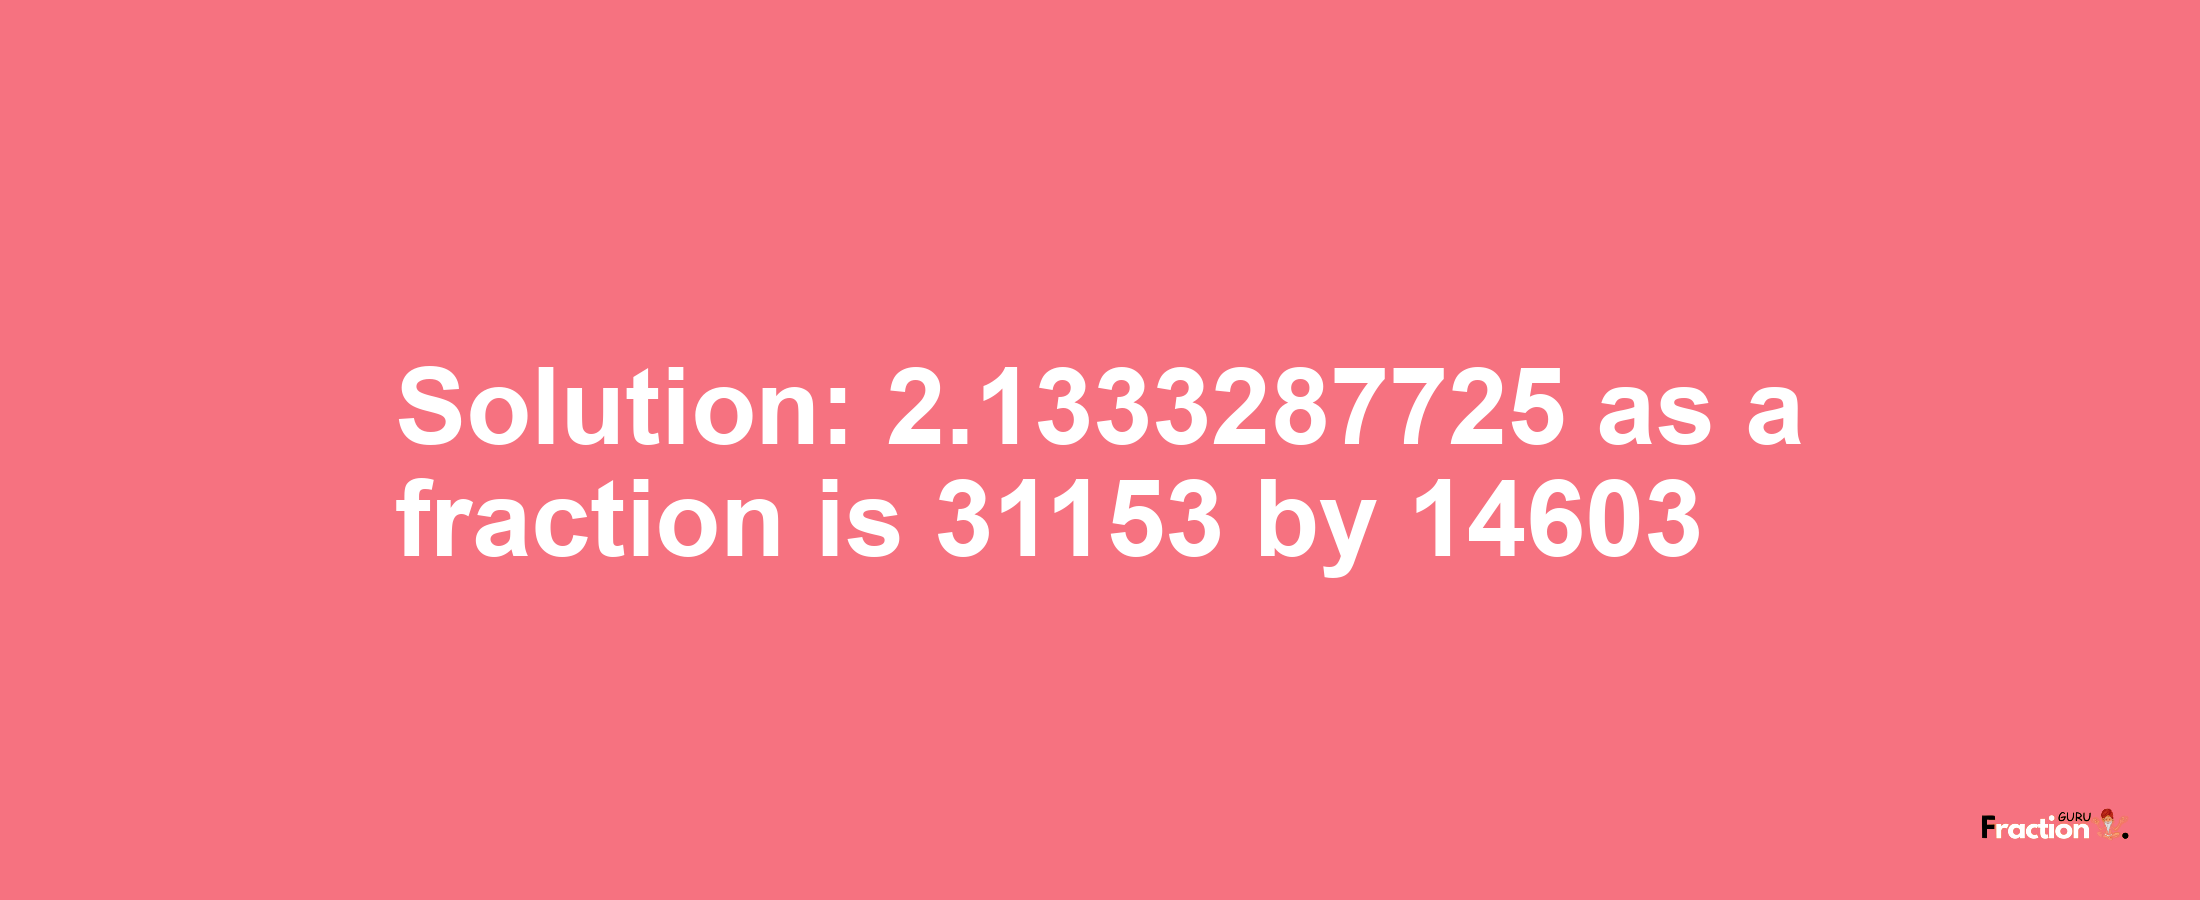 Solution:2.1333287725 as a fraction is 31153/14603